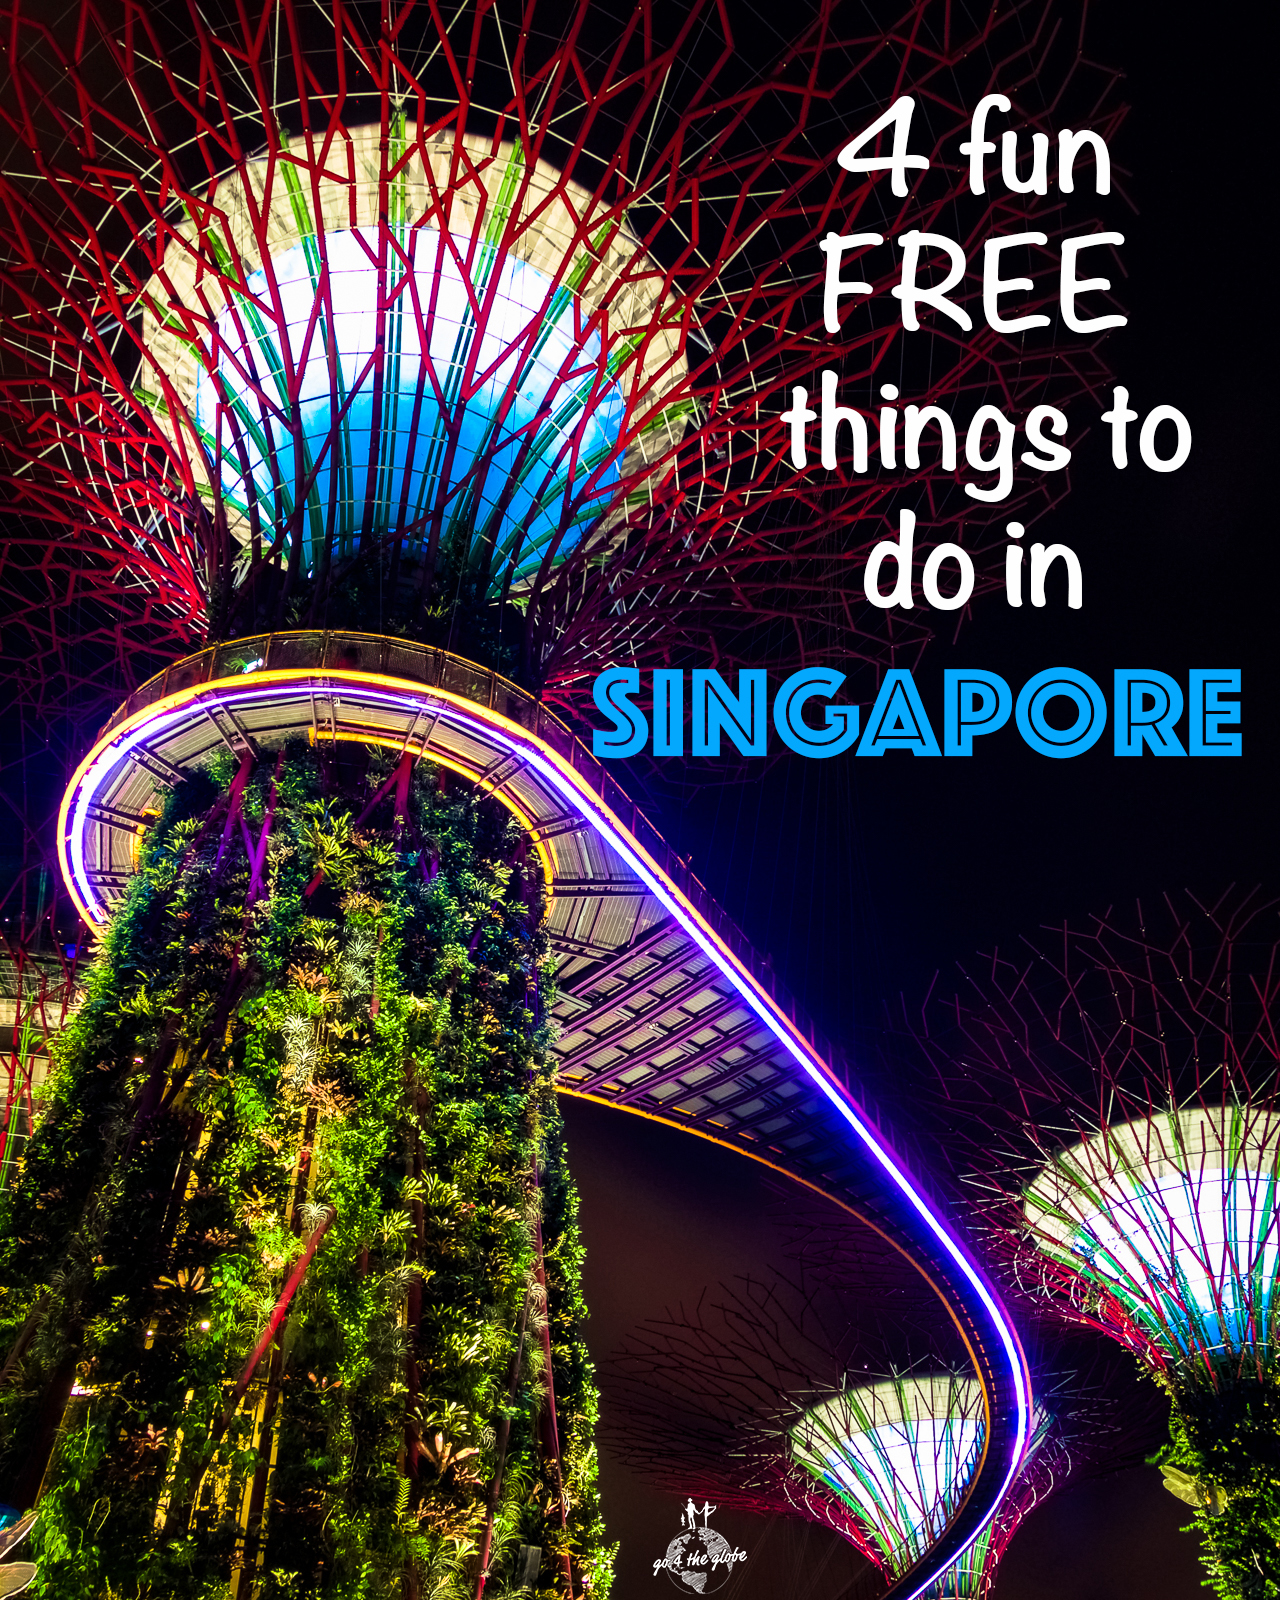 Singapore supertree grove at Gardens by the Bay